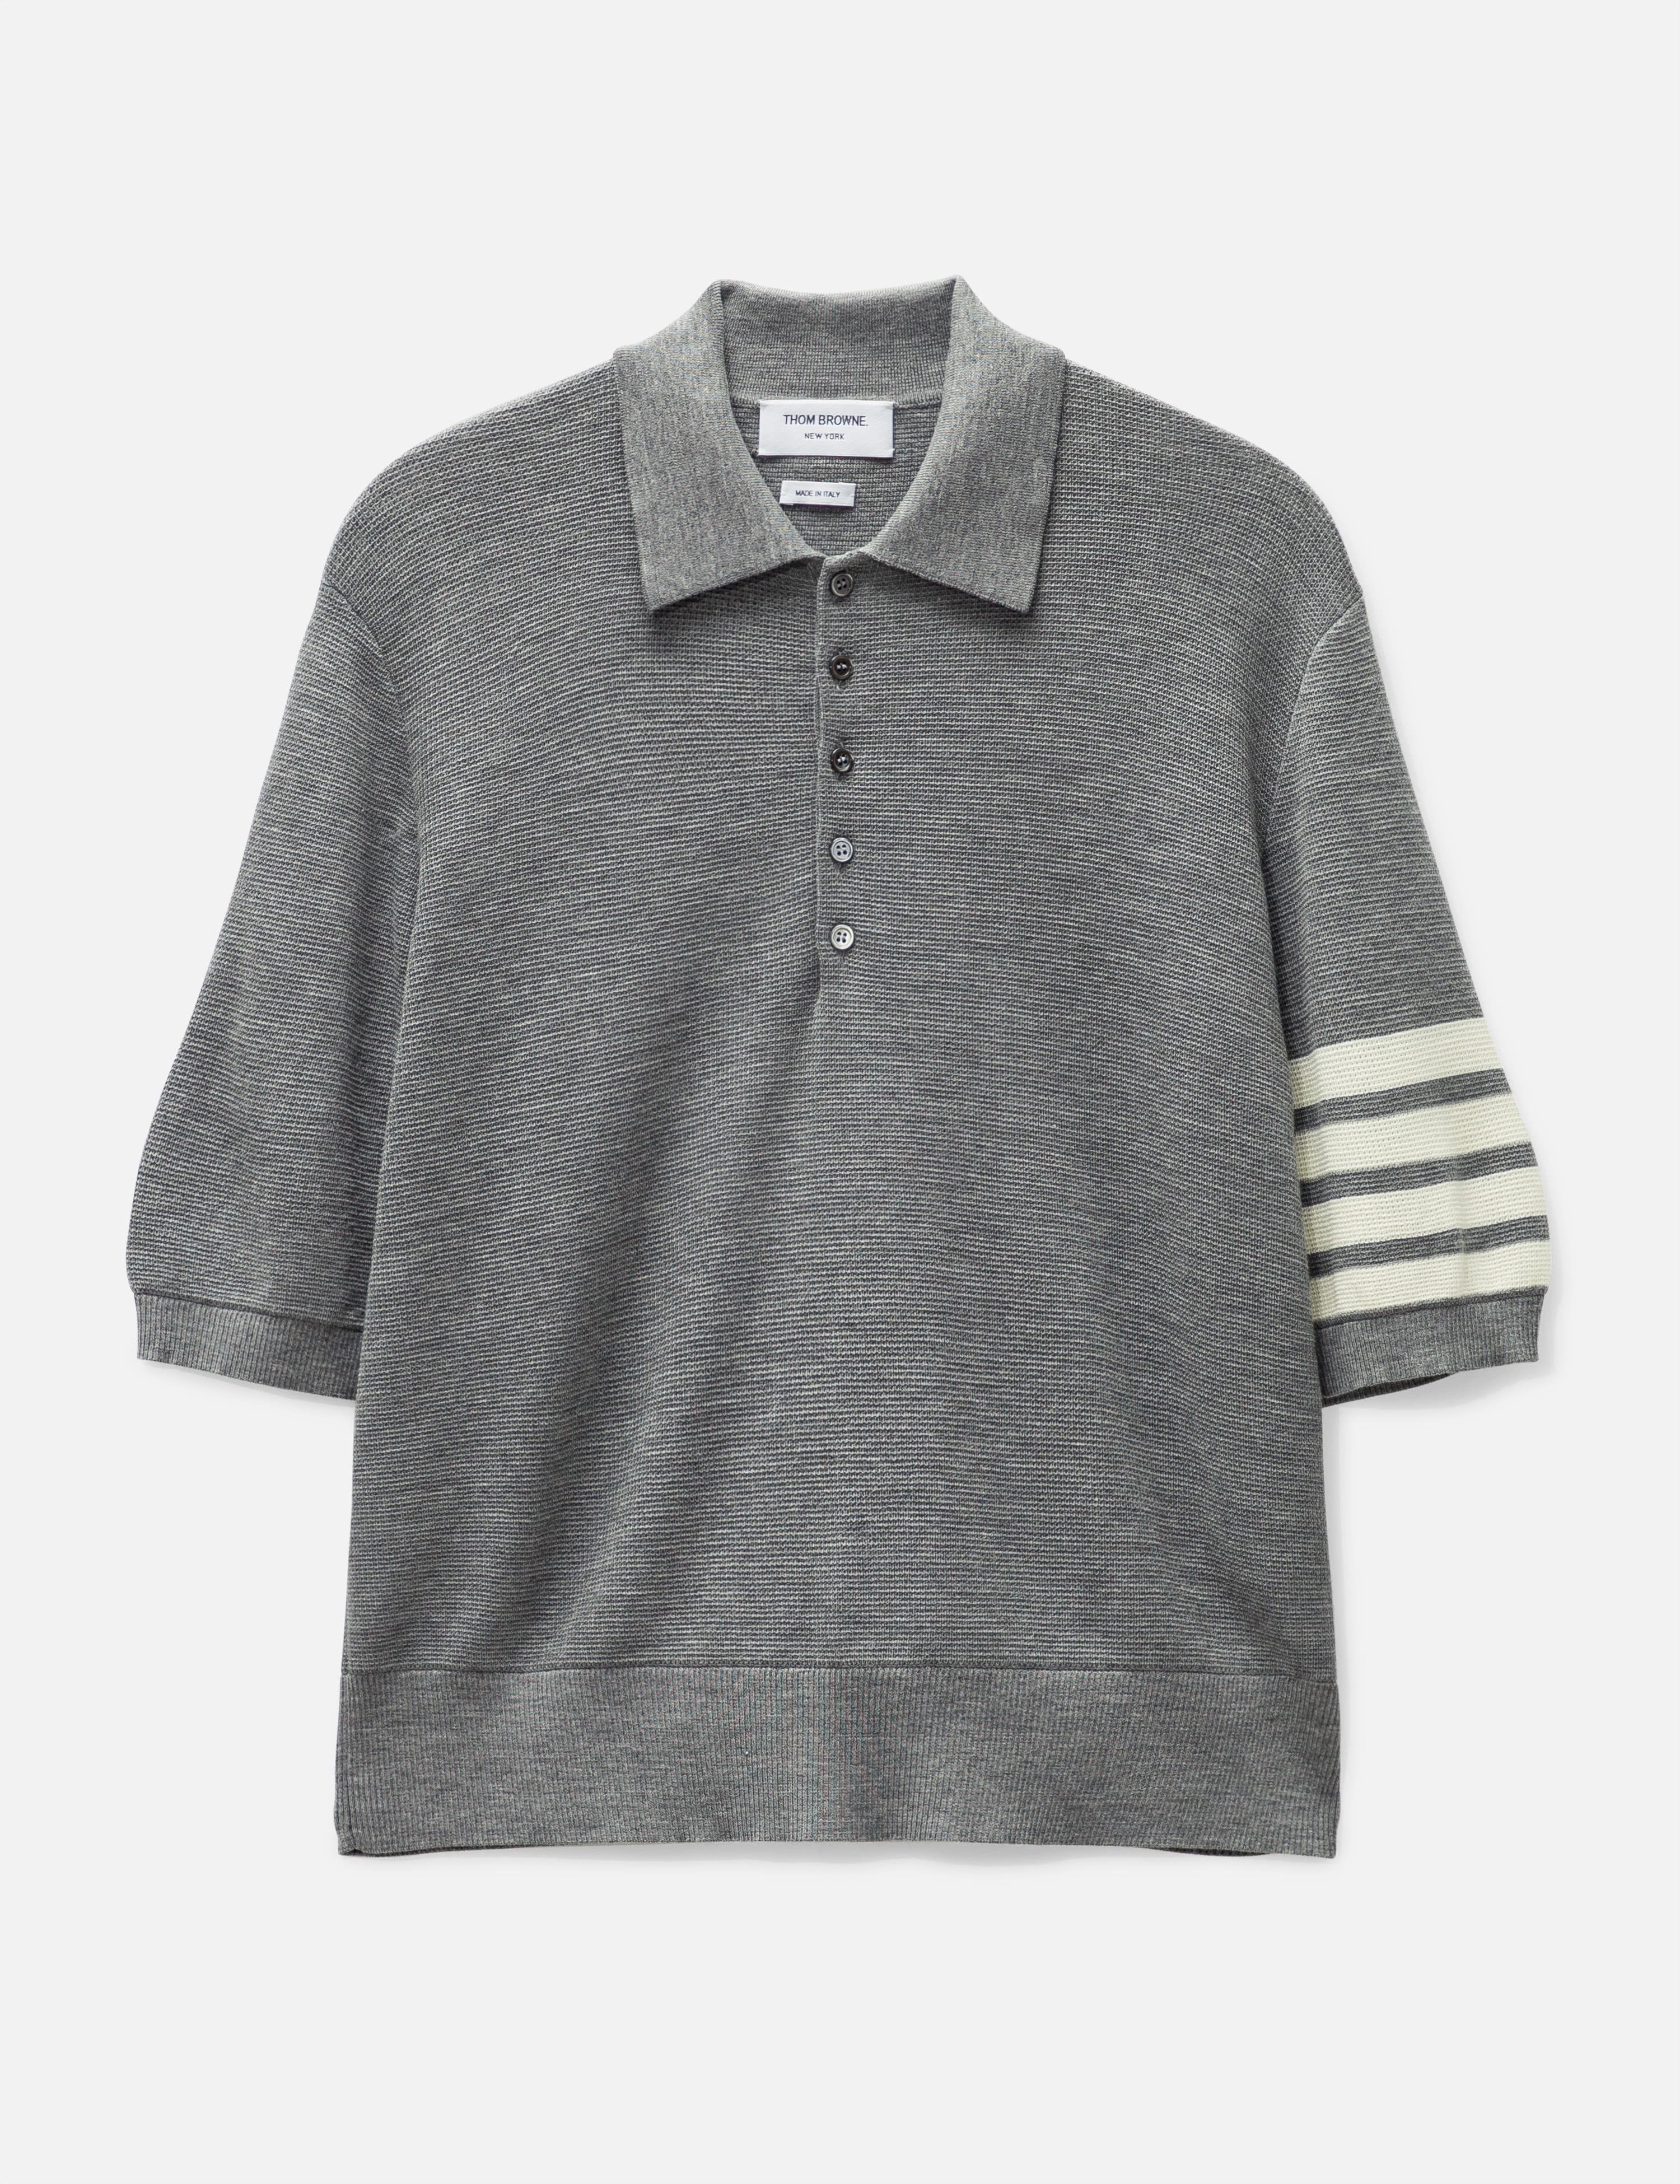 BoTT - Door Jacquard Polo | HBX - Globally Curated Fashion and